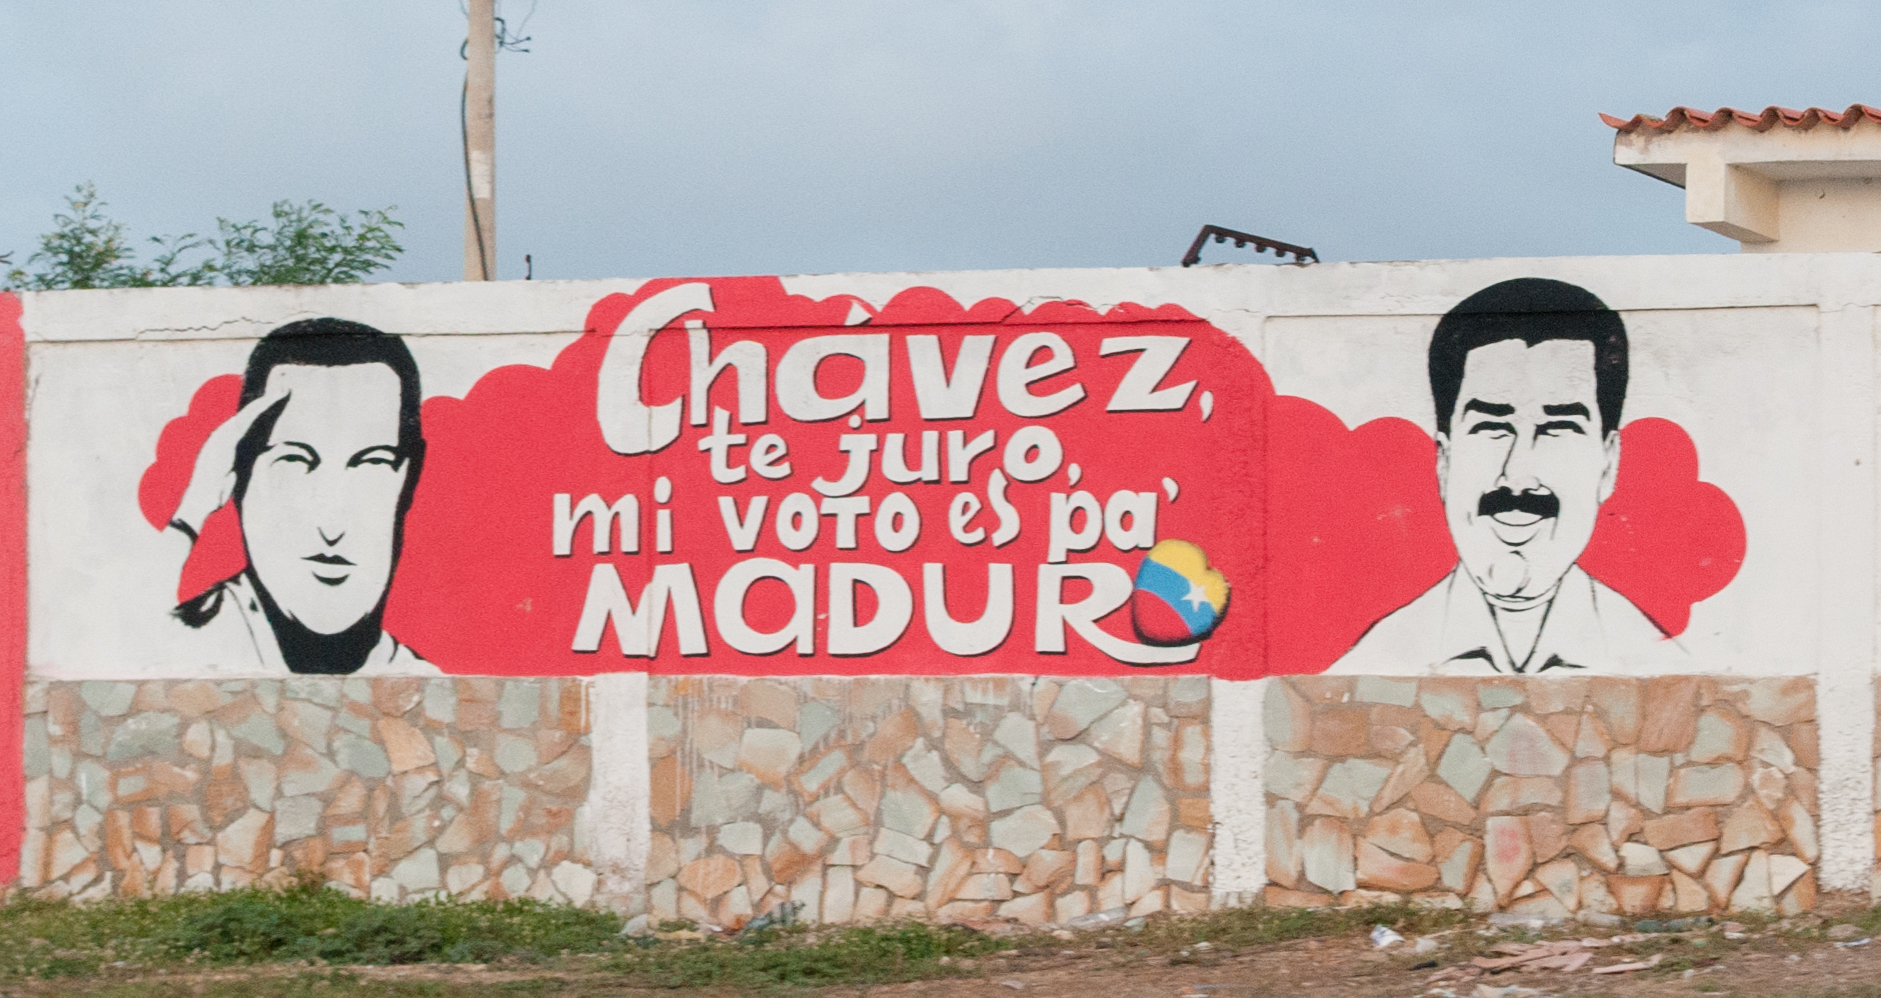 “Chavez, I promise you, I will vote for Maduro,” sign on wall in 2013. (Wikimedia)